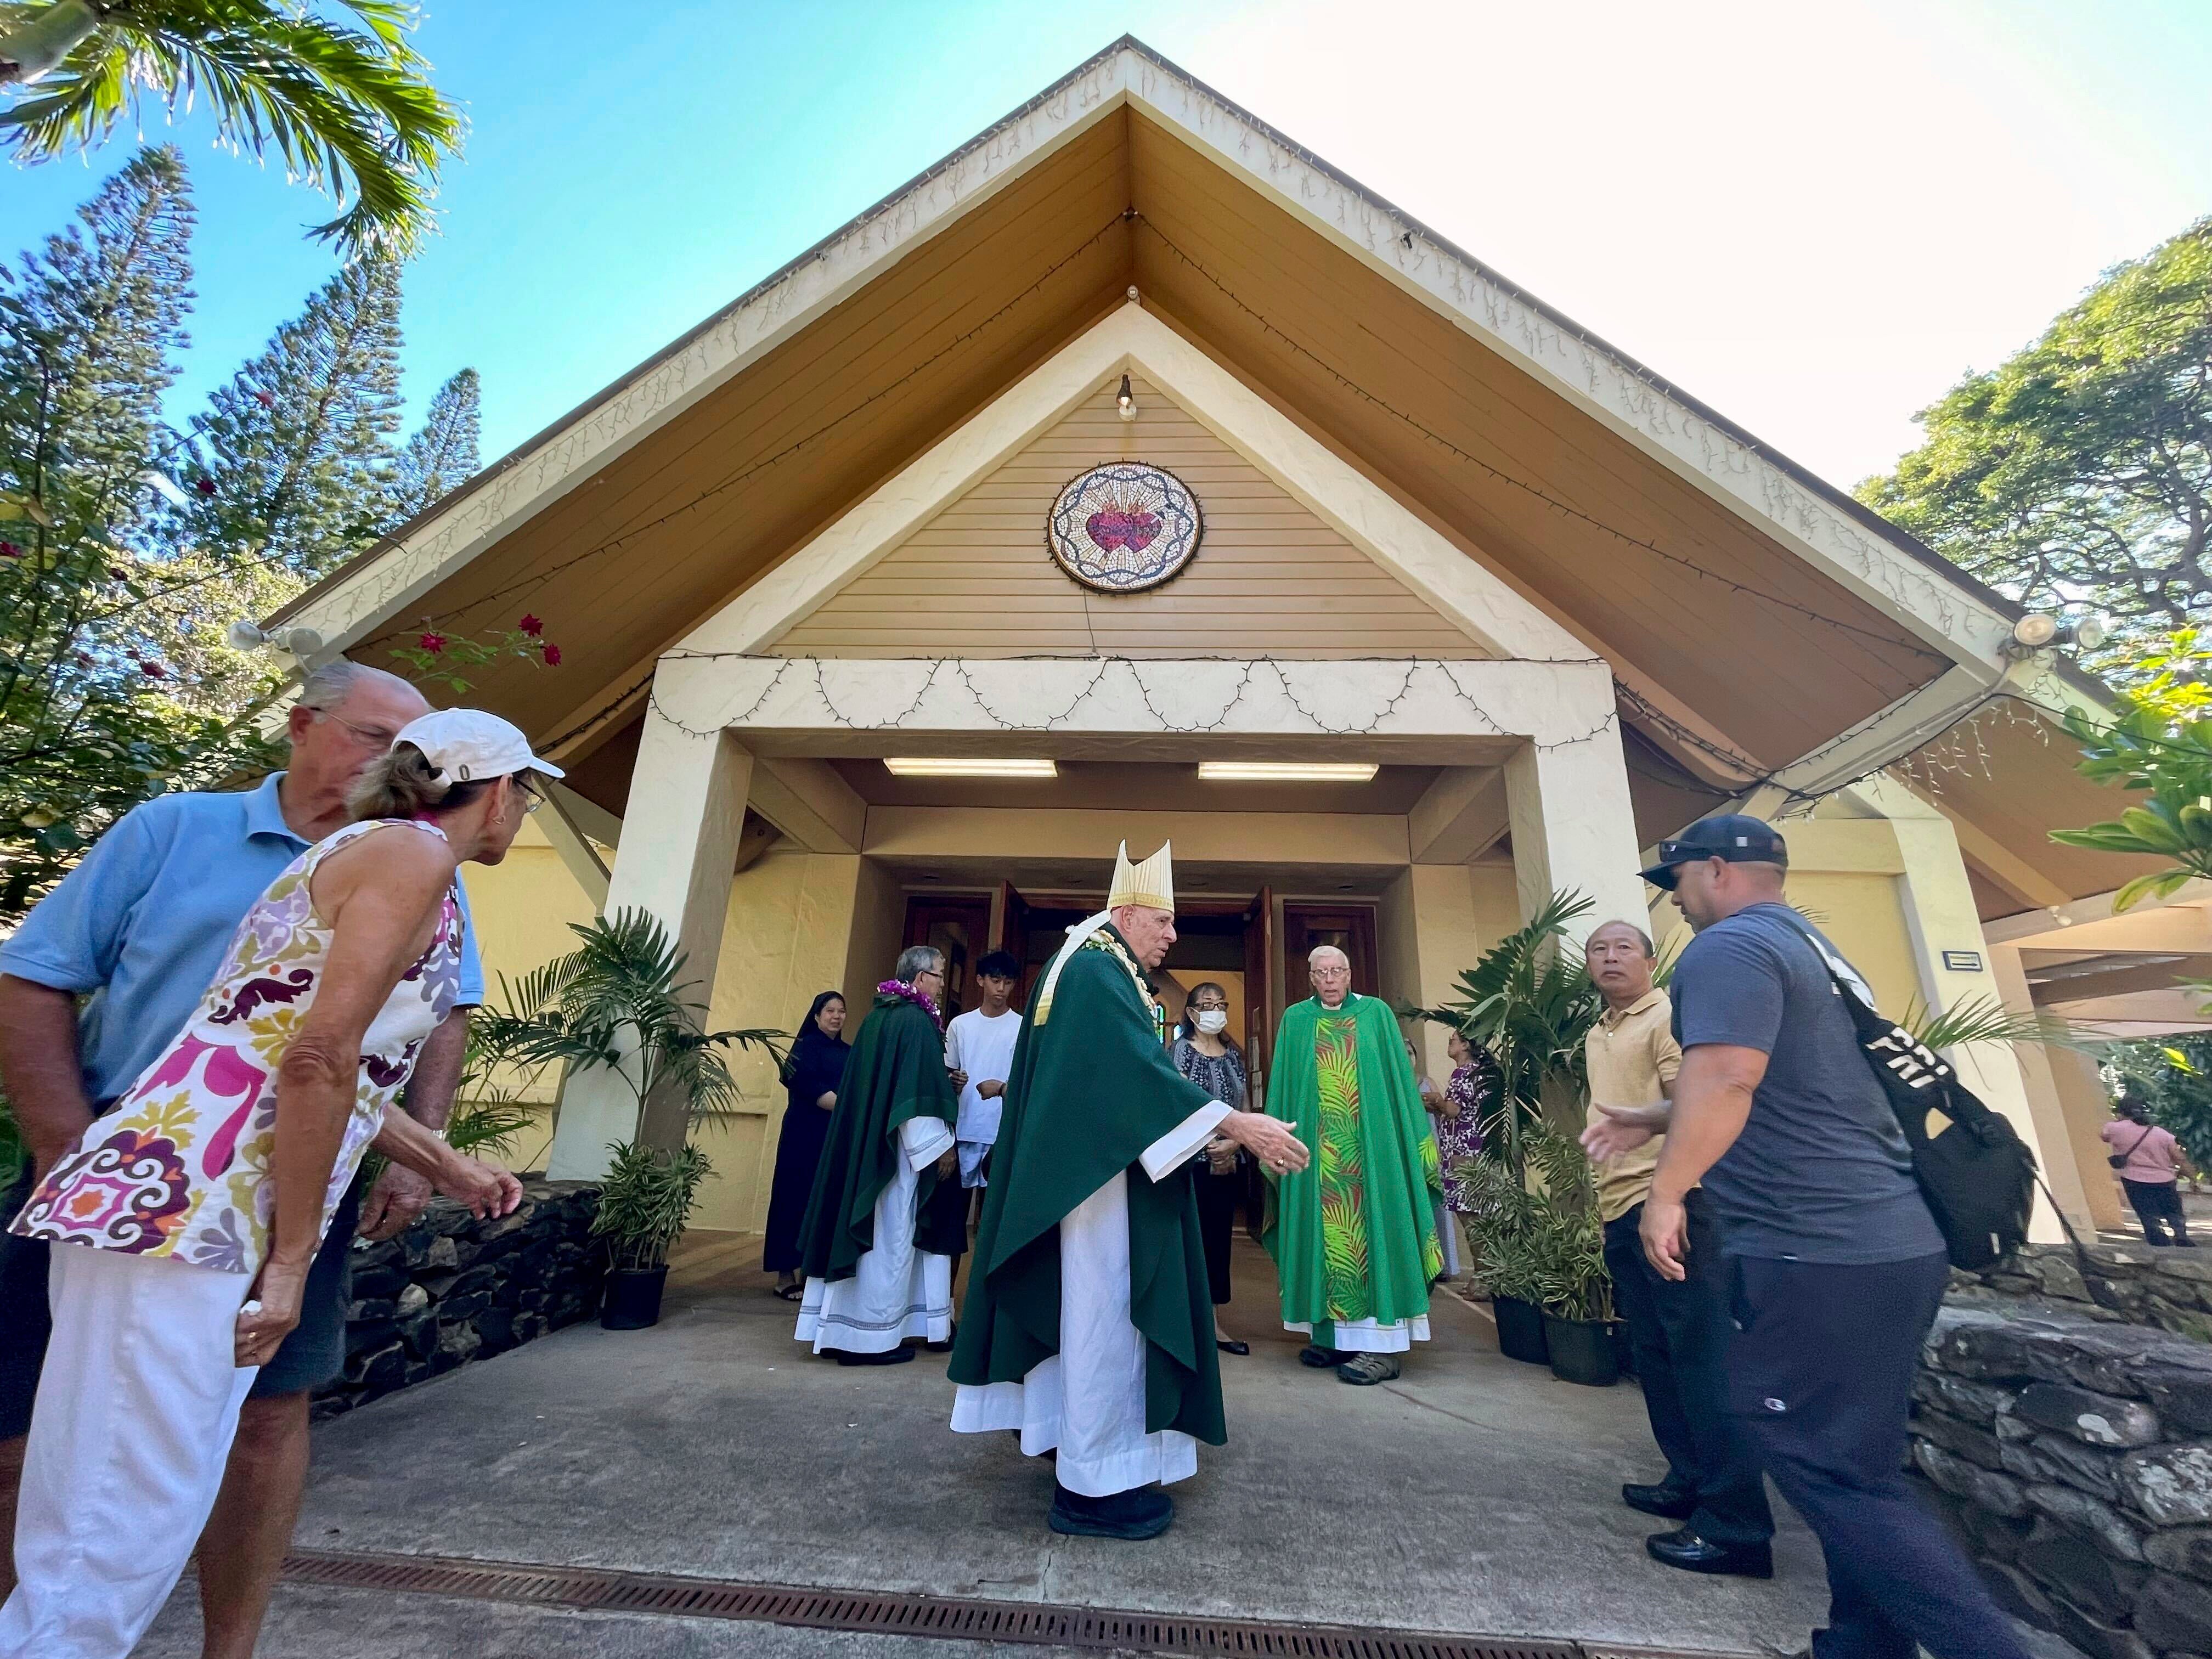 Most Rev. Clarence “Larry” Silva, the Bishop of Honolulu, greets parishioners after Mass at Sacred Hearts Mission Church on Sunday, after it was spared by wildfires